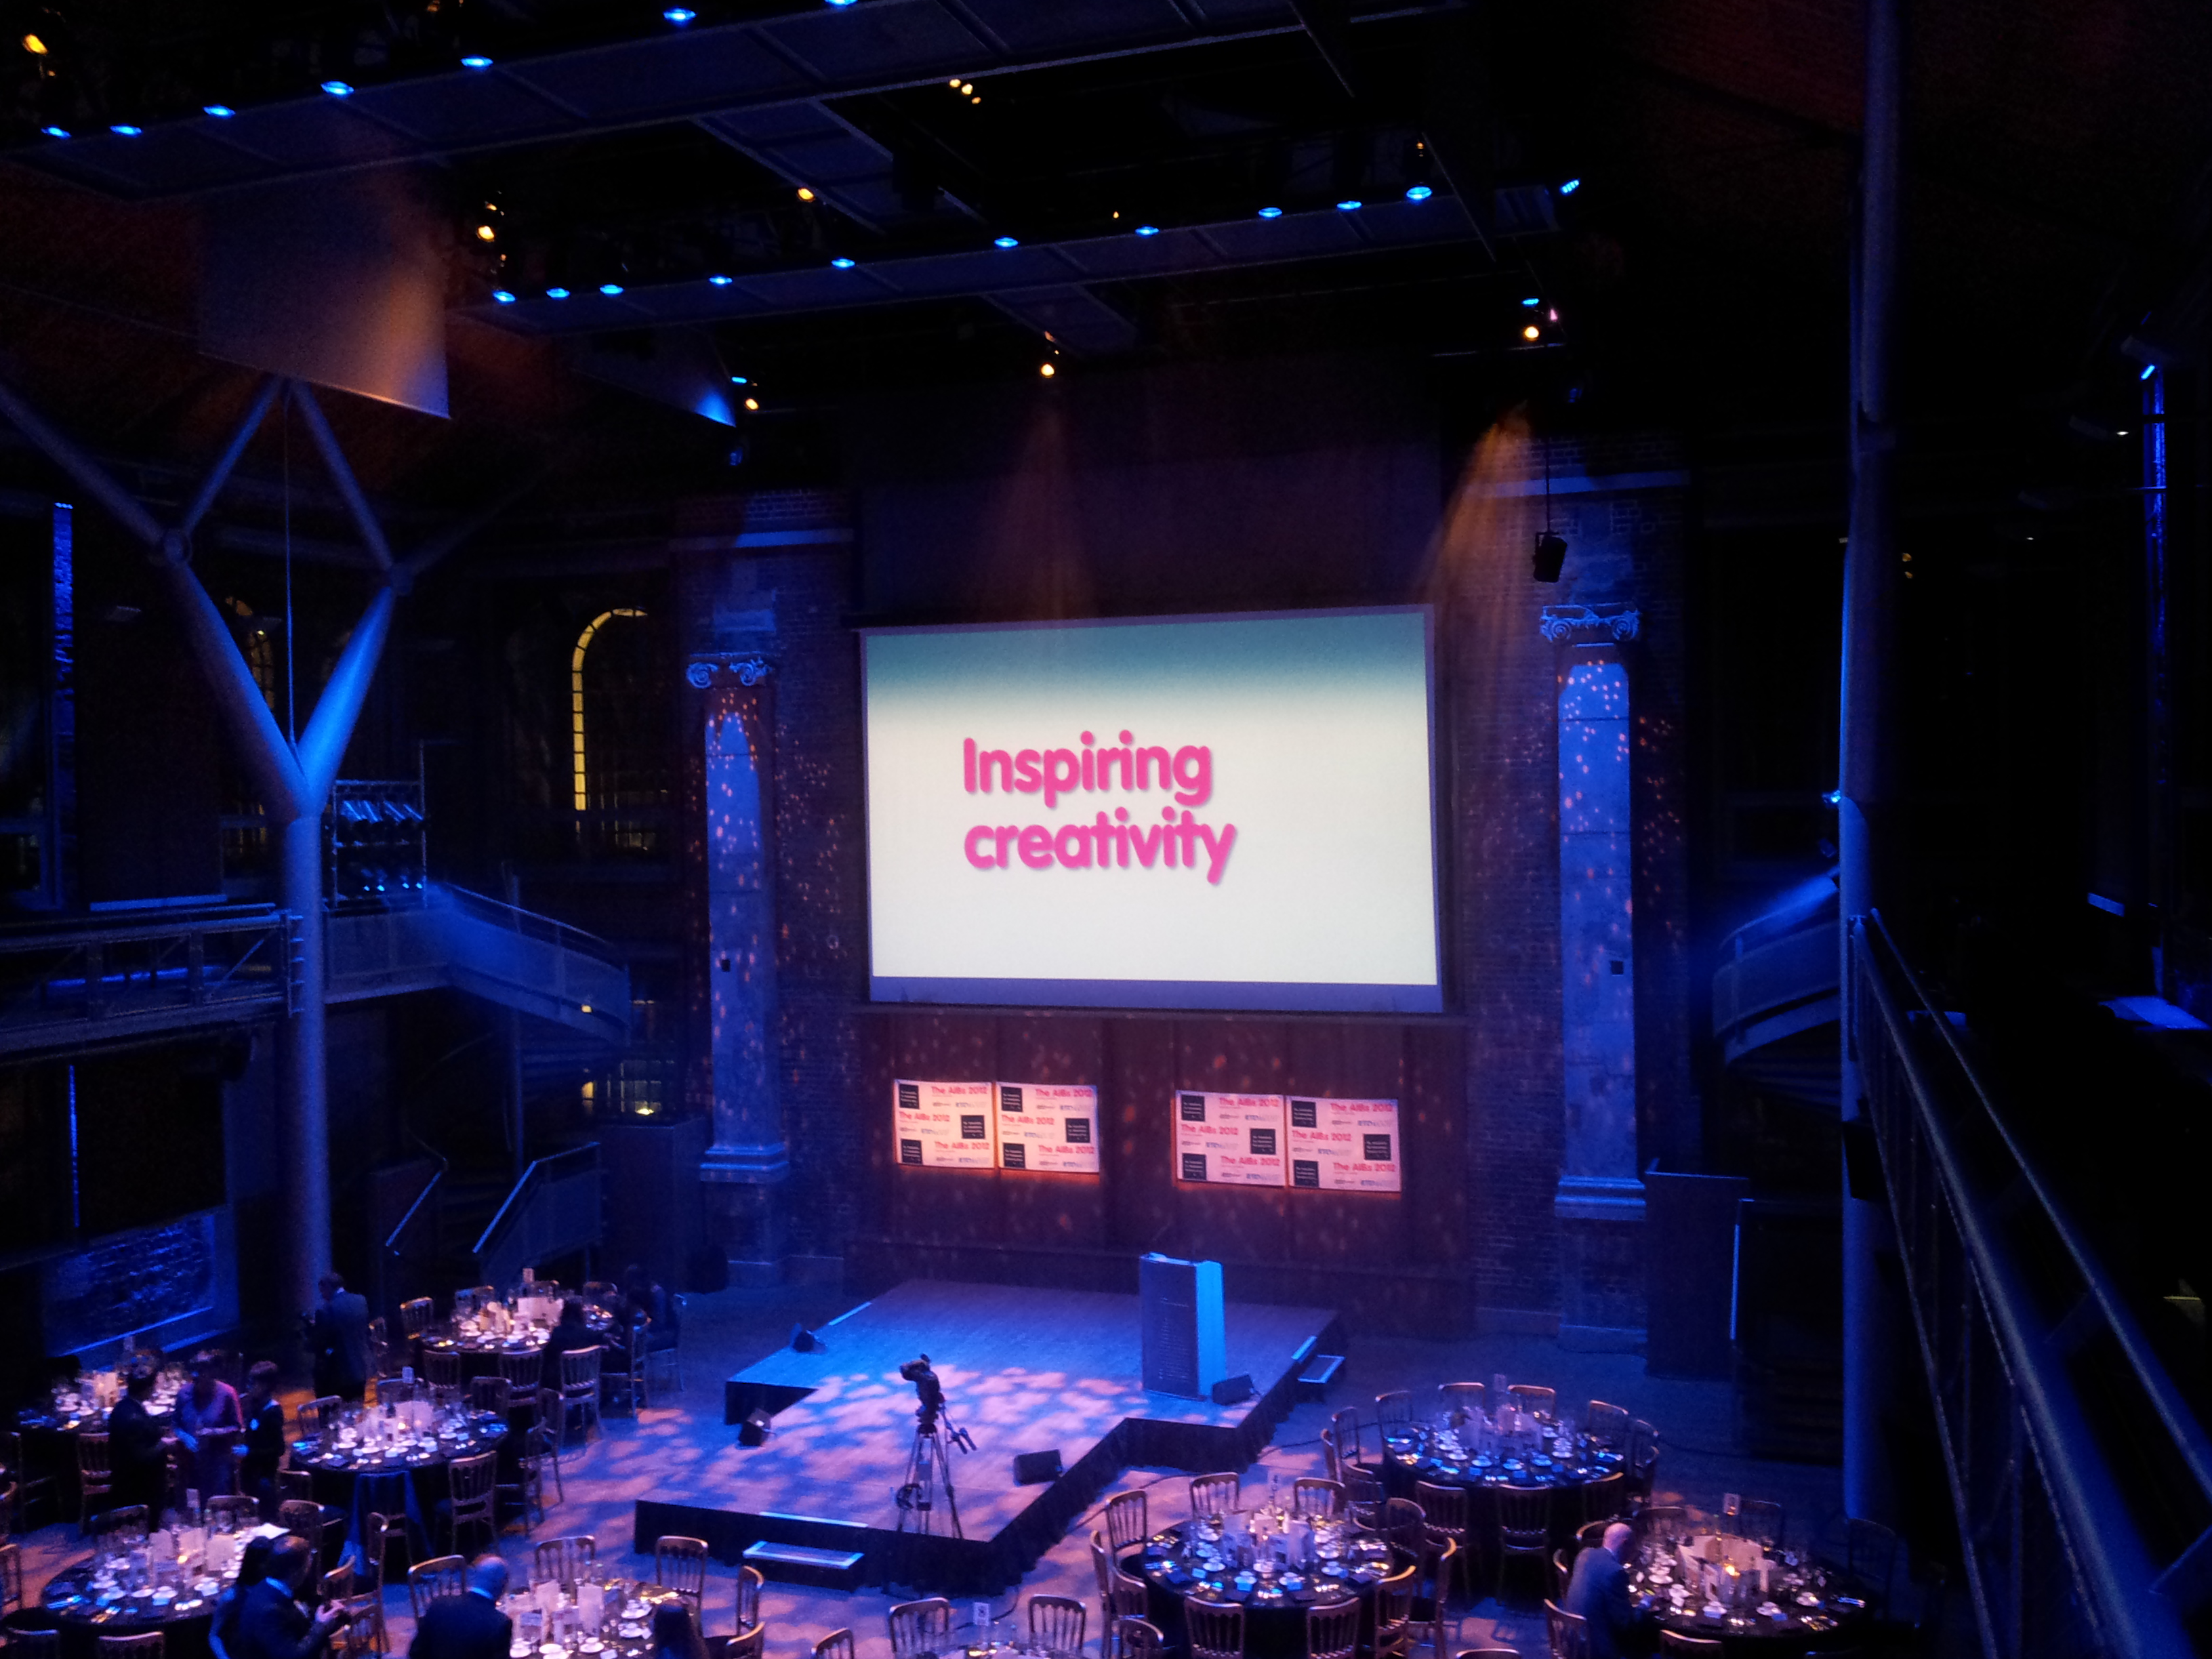 Photo of the 2012 AIBs dinner set up with "Inspiring Creativity" on the main screen